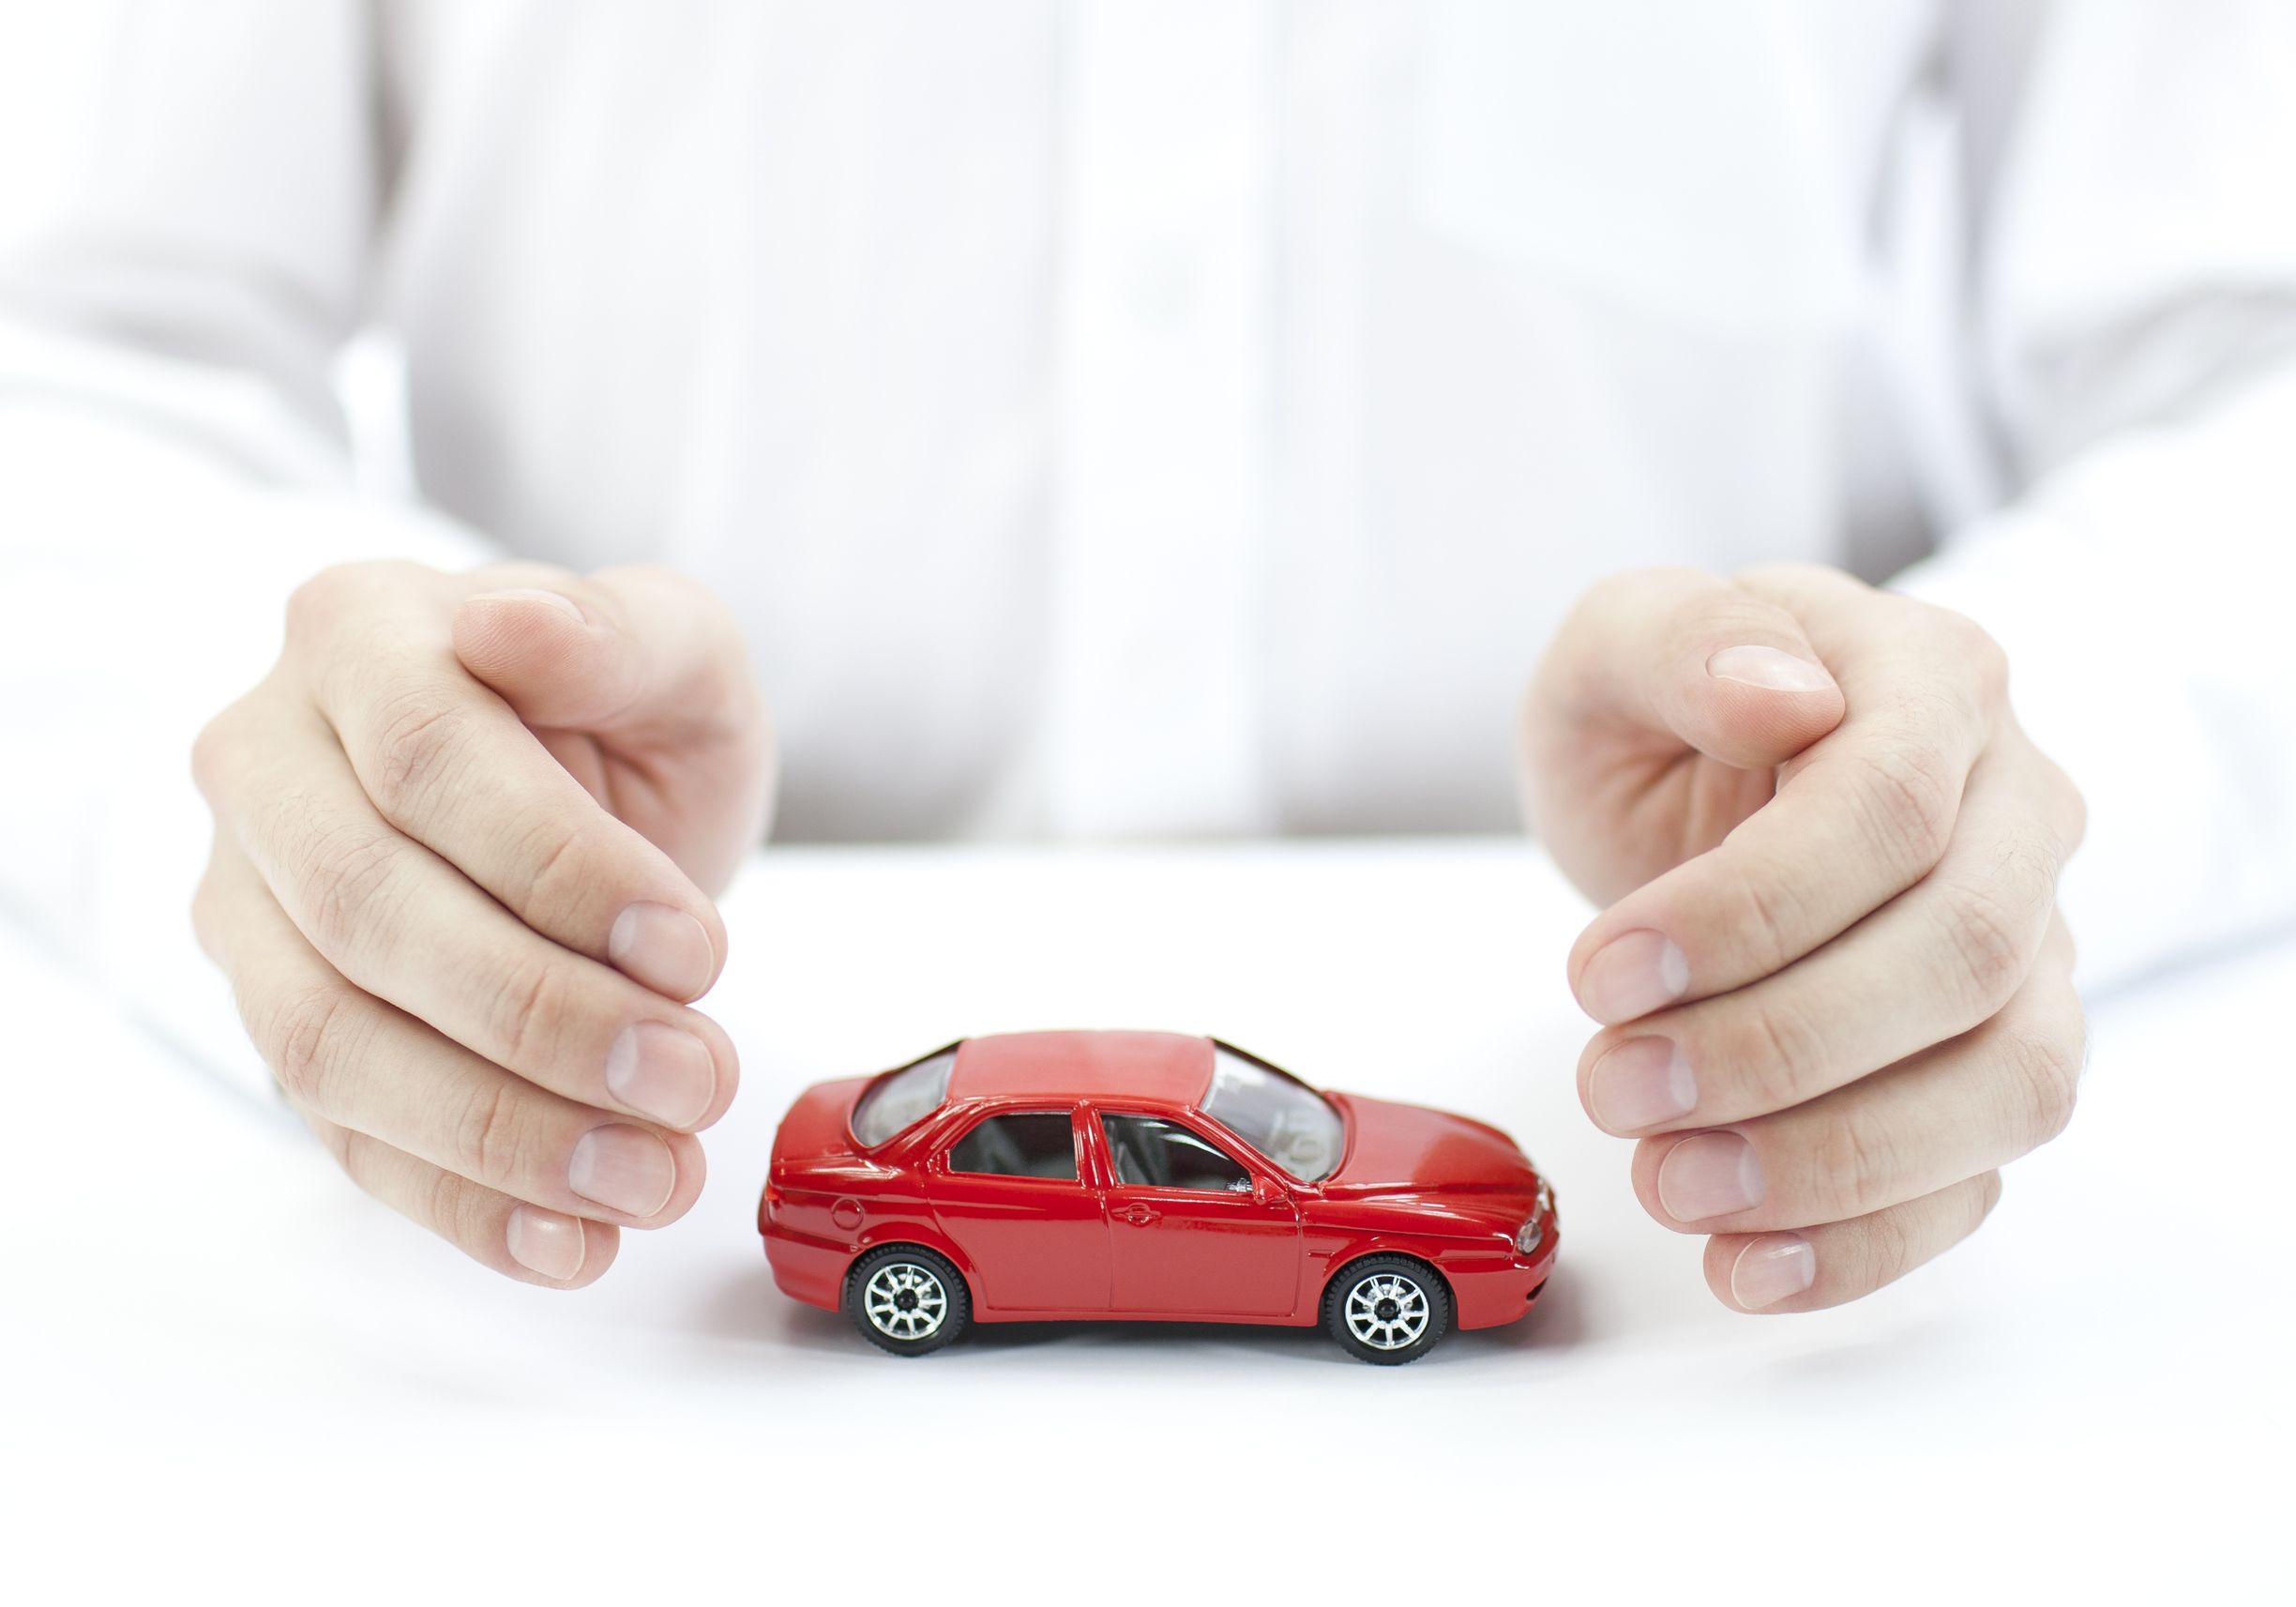 A Good Car Insurance Company in Hialeah, FL Makes Sure That You’re Well Covered